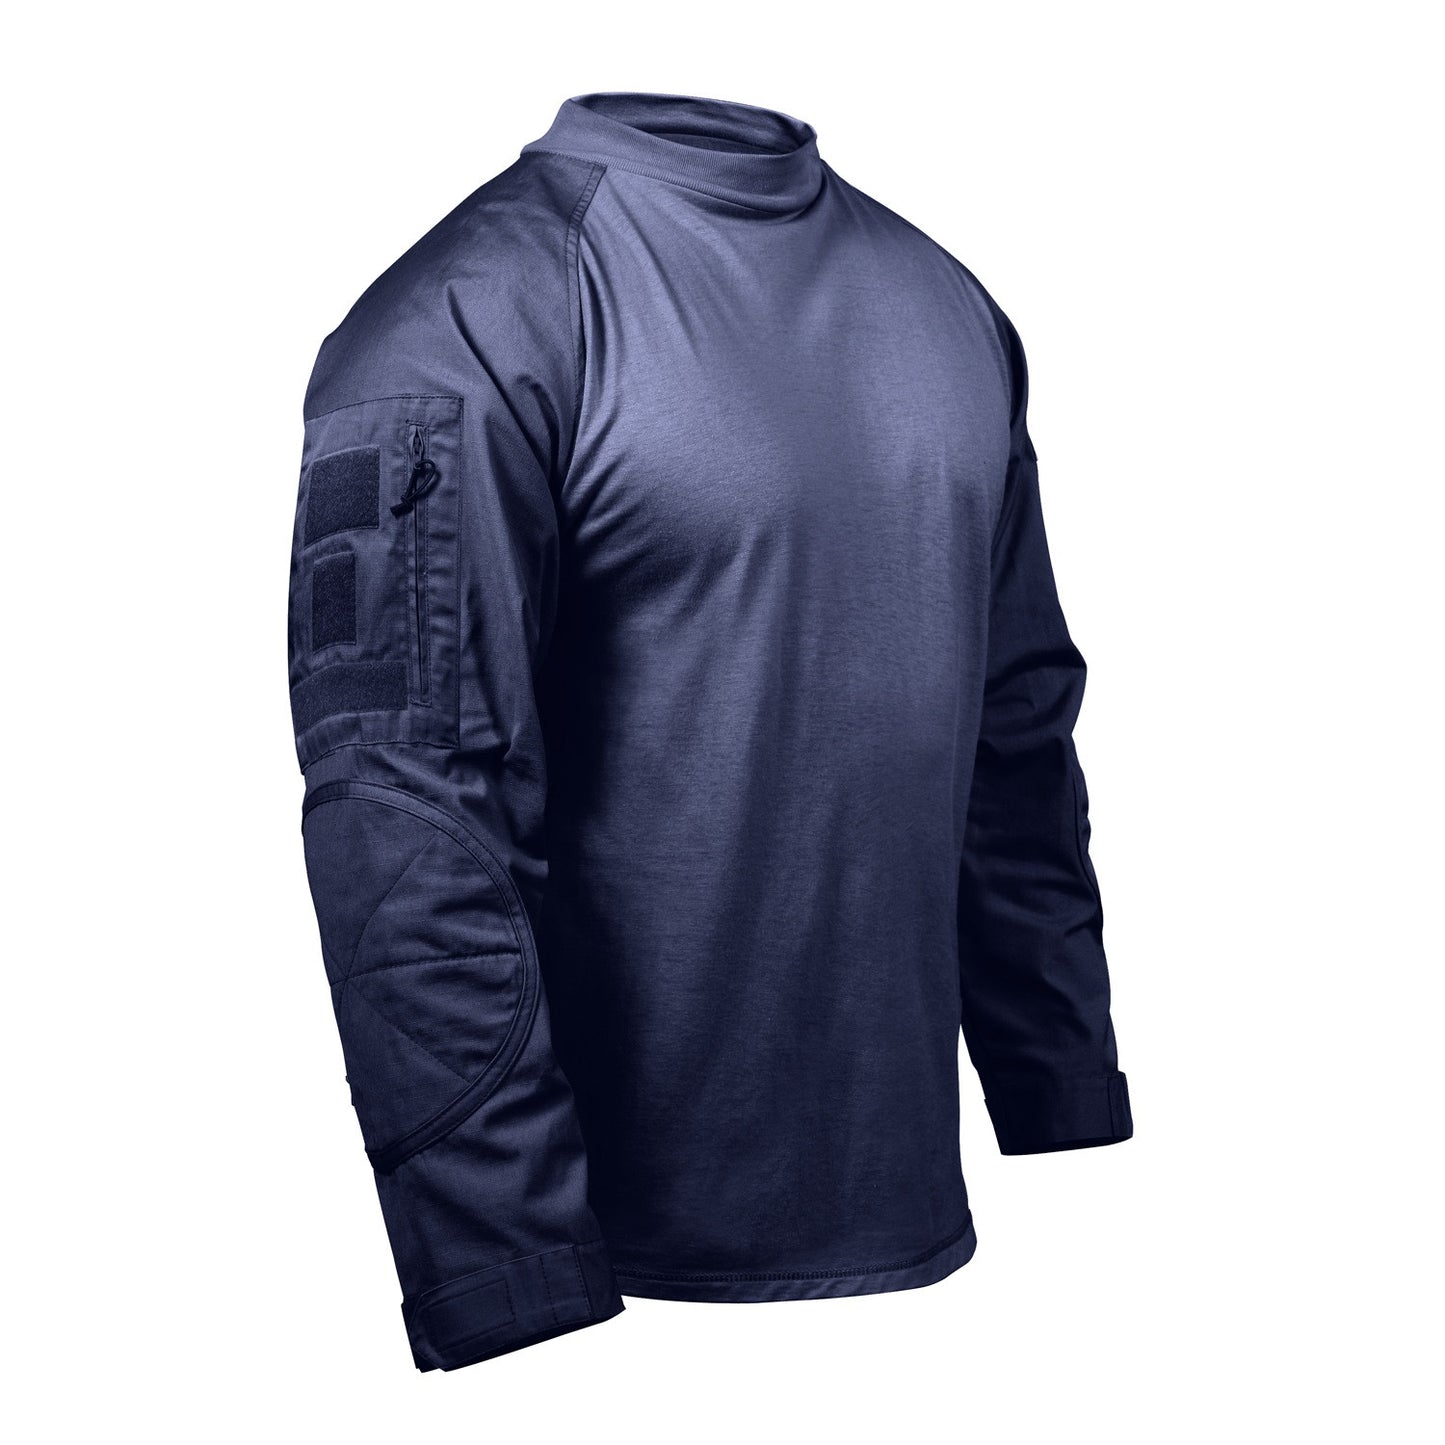 Tactical Combat Shirt - Lightweight Moisture Wicking and Breathable